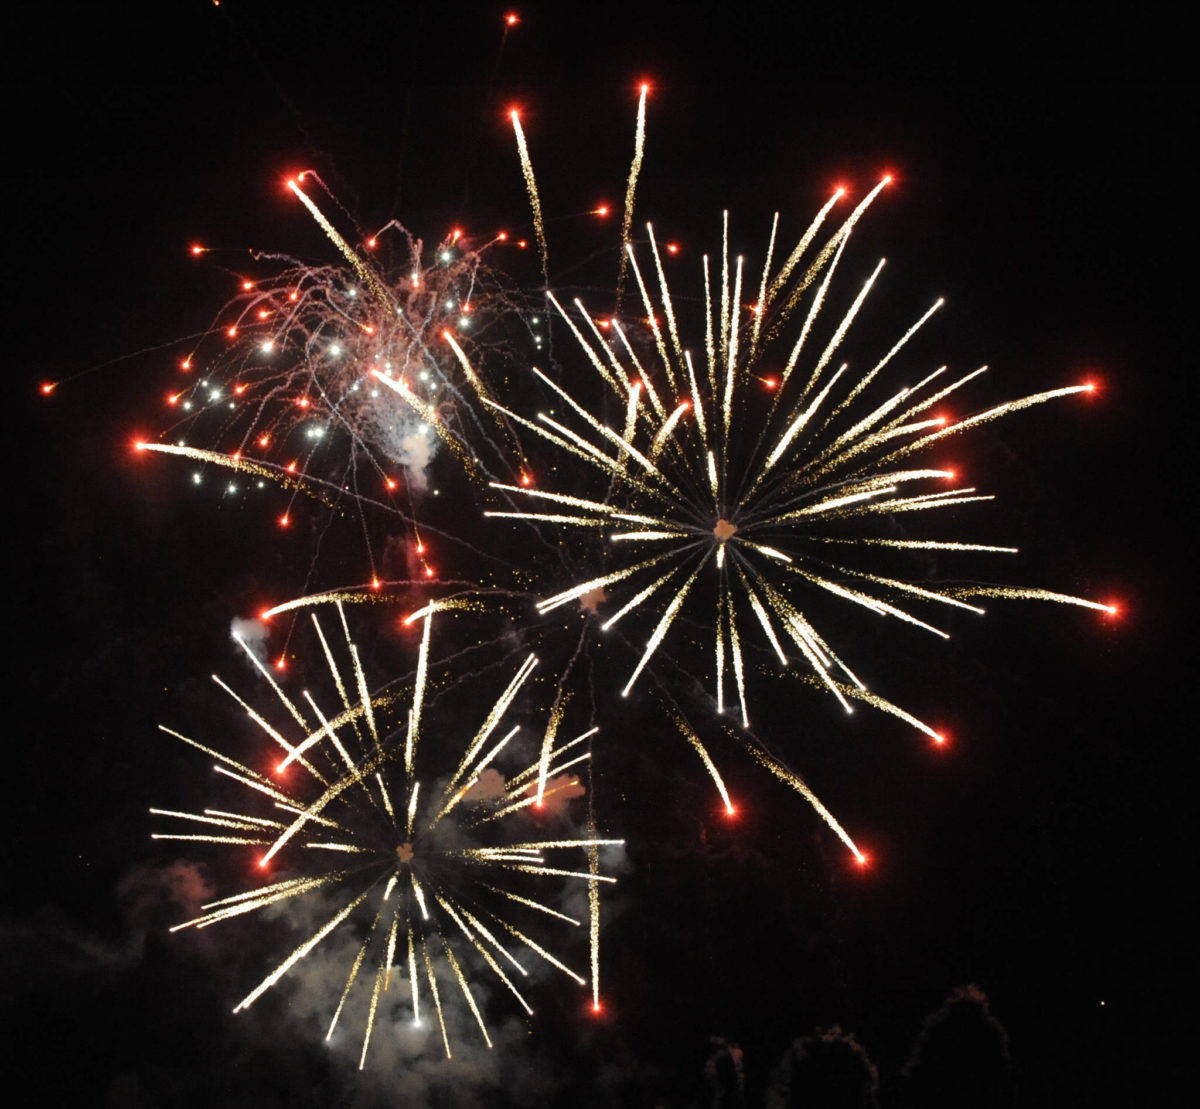 Fireworks could be coming next independence Day in Sequim depending on proposals tentatively coming to Sequim city councilors. Sequim hosts fireworks each May for the Sequim Irrigation Festival Logging Show, as seen here in 2018. Sequim Gazette file photo by Michael Dashiell